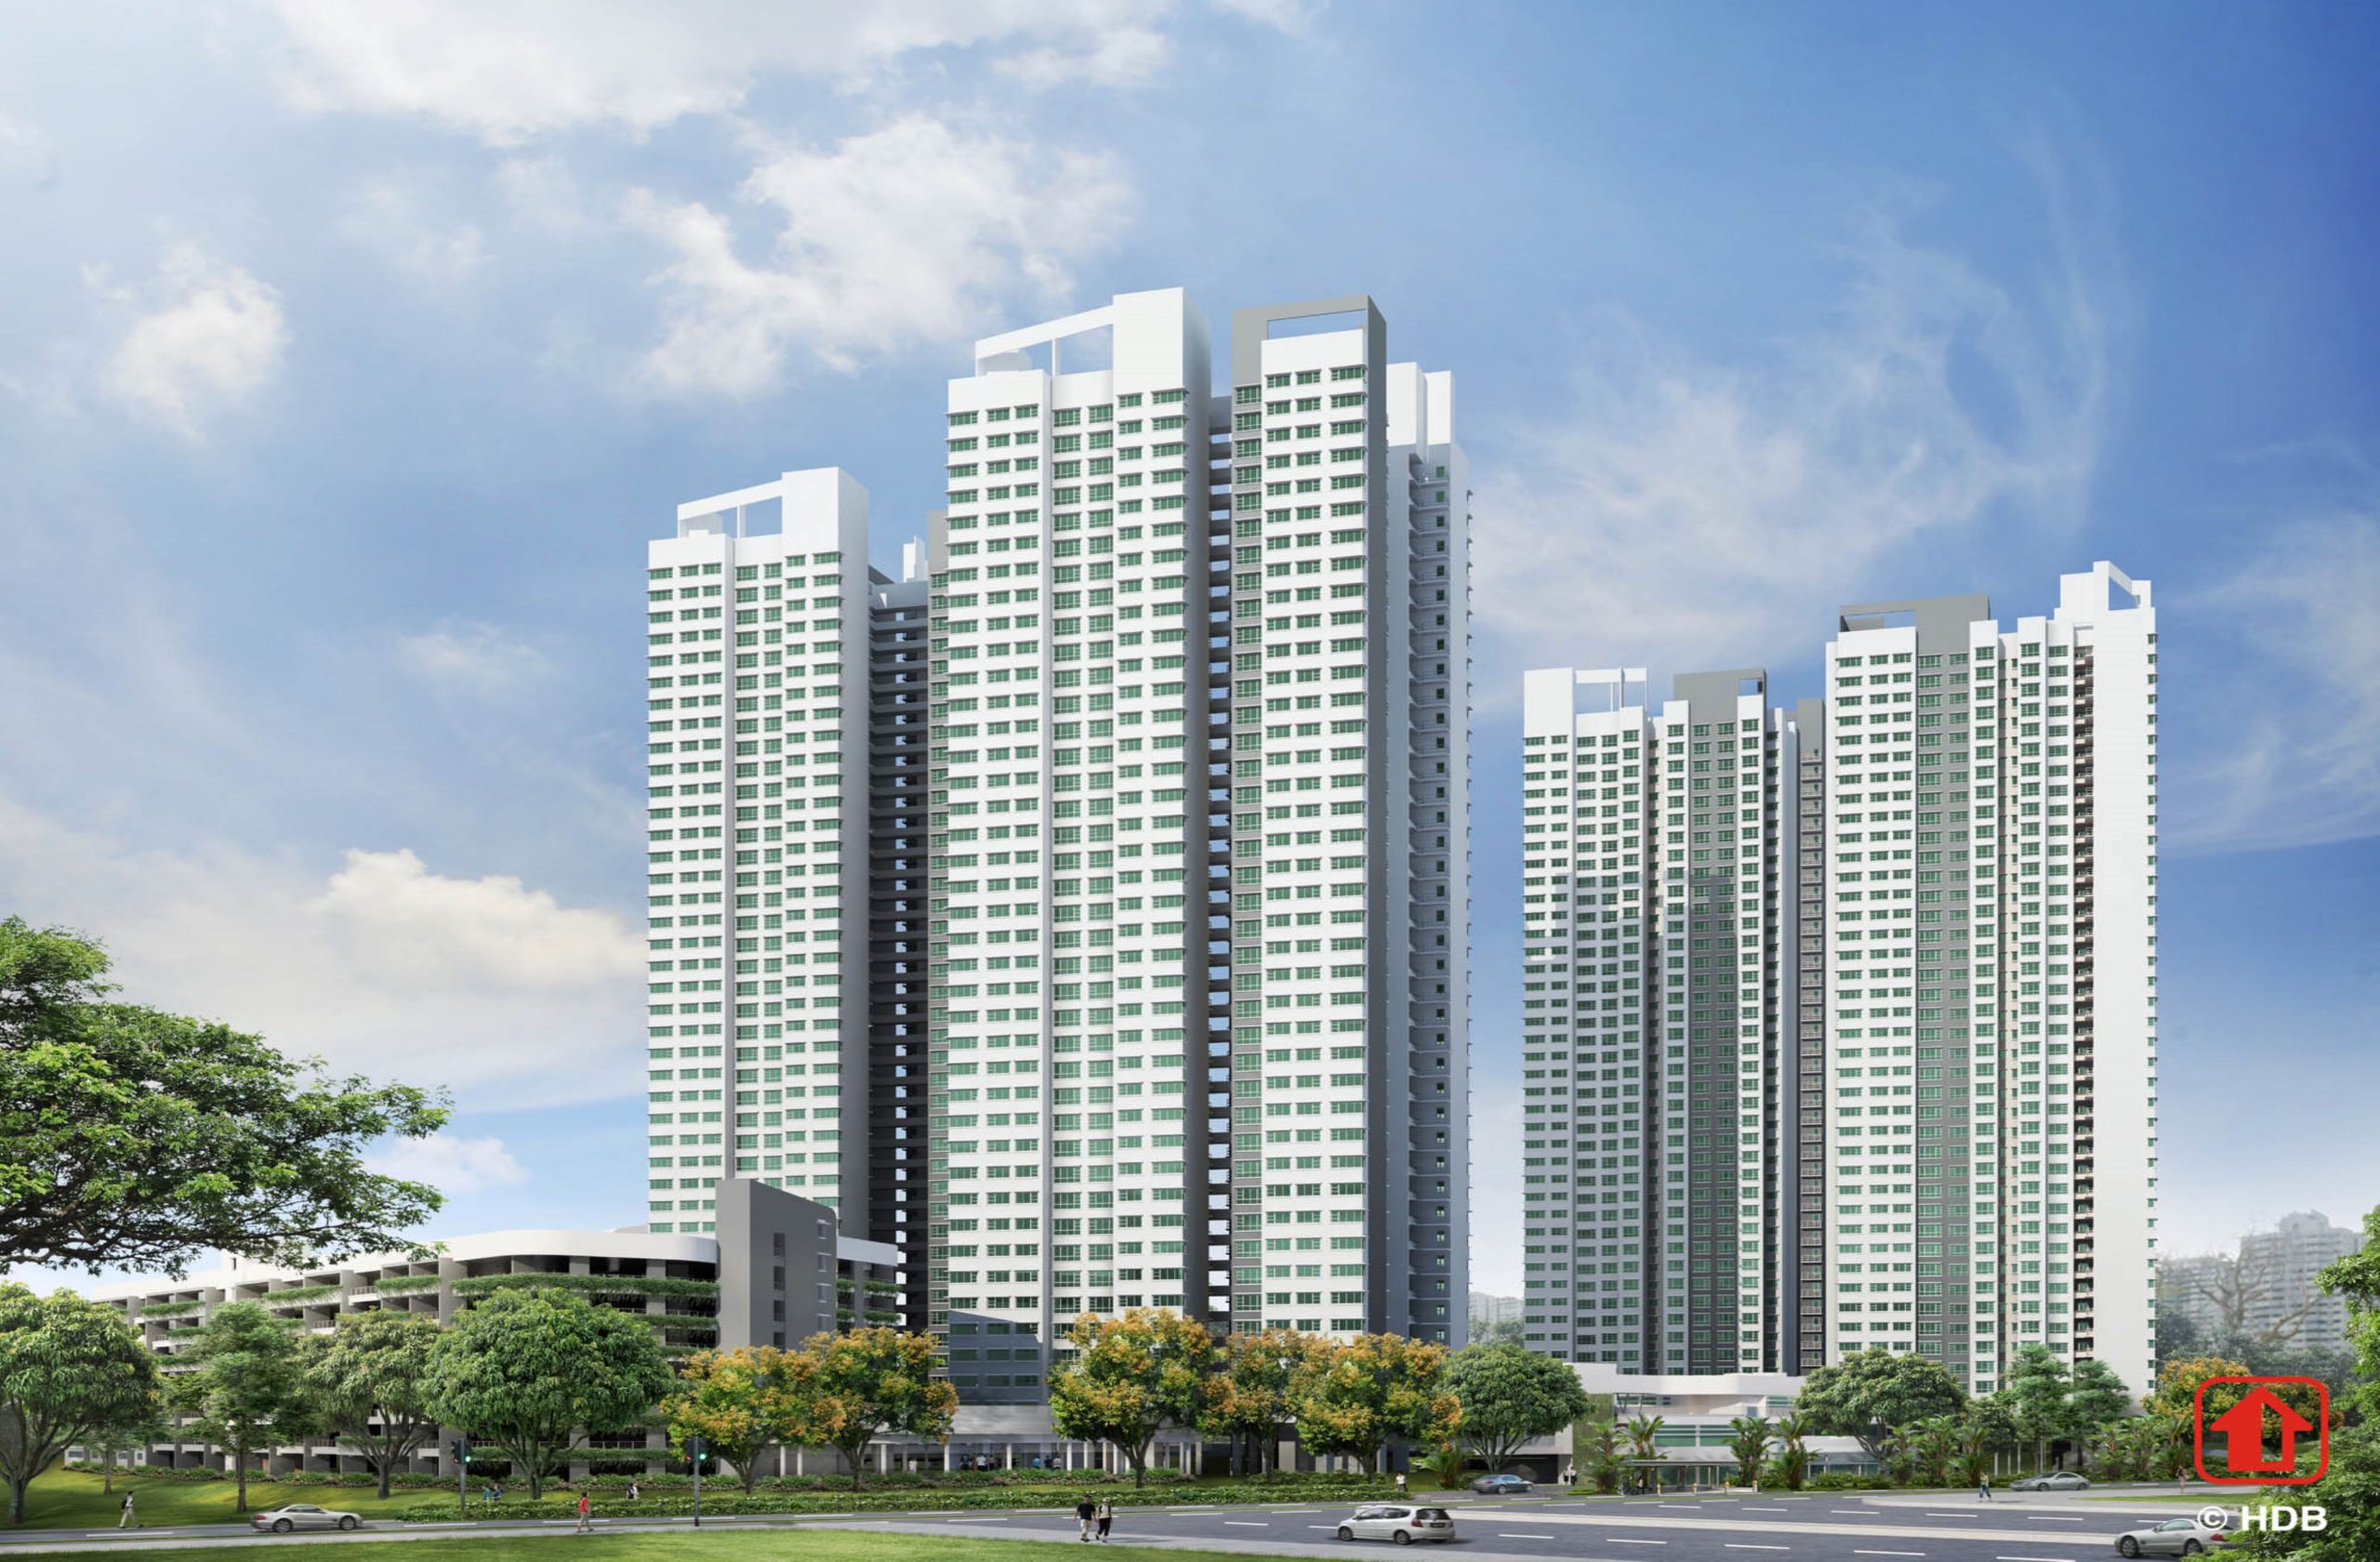 Toa Payoh Crest